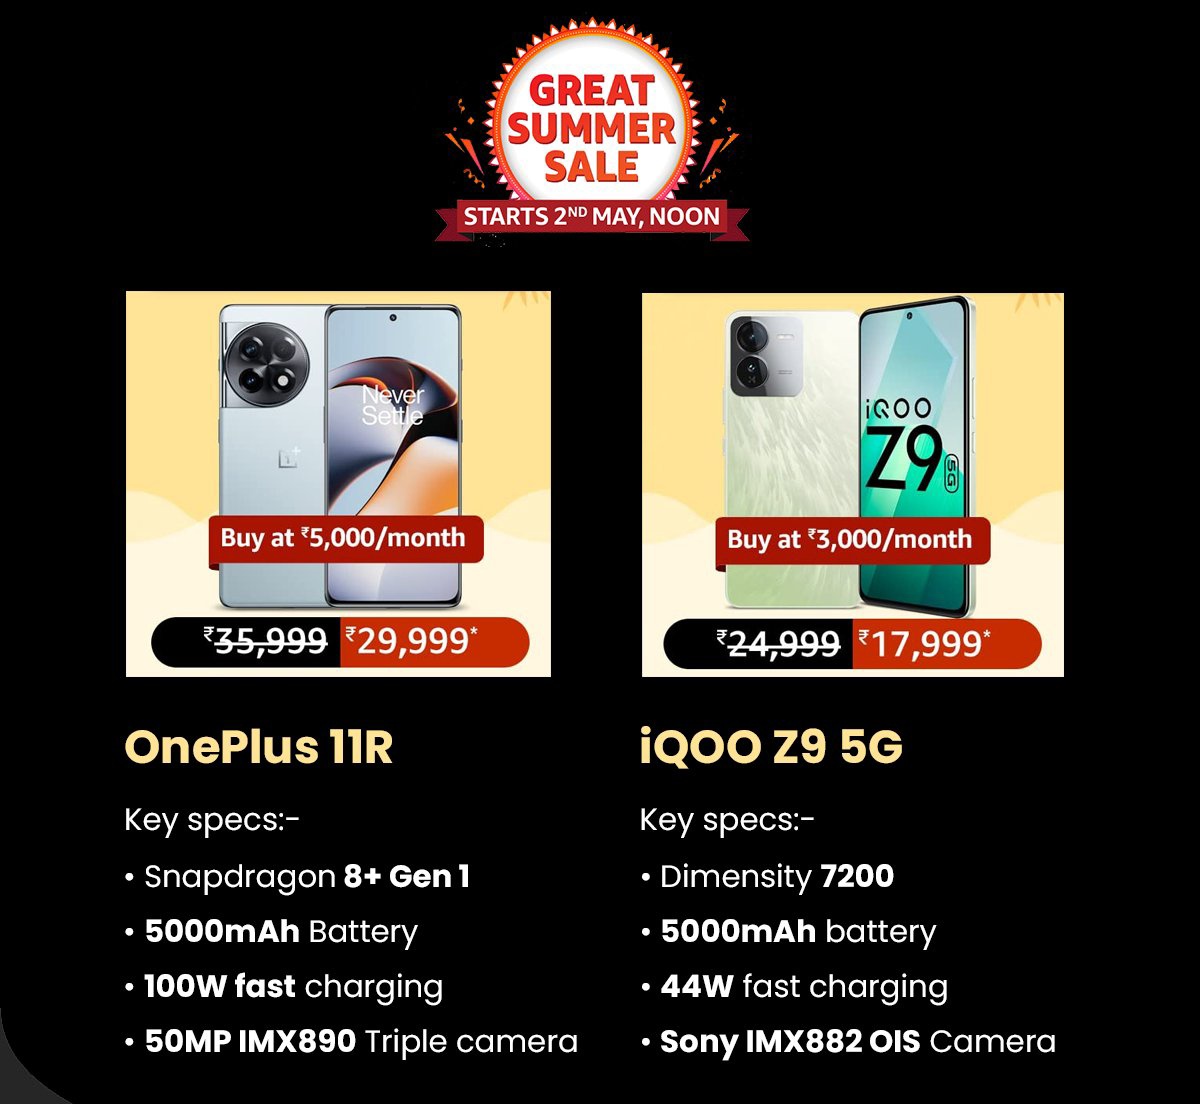 Amazon unveiled hot deals on the OnePlus 11R and iQOO Z9 5G. Let us know which one fits your budget better!

#Amazon #OnePlus11R #iQOOZ9 #GreatSummerSale